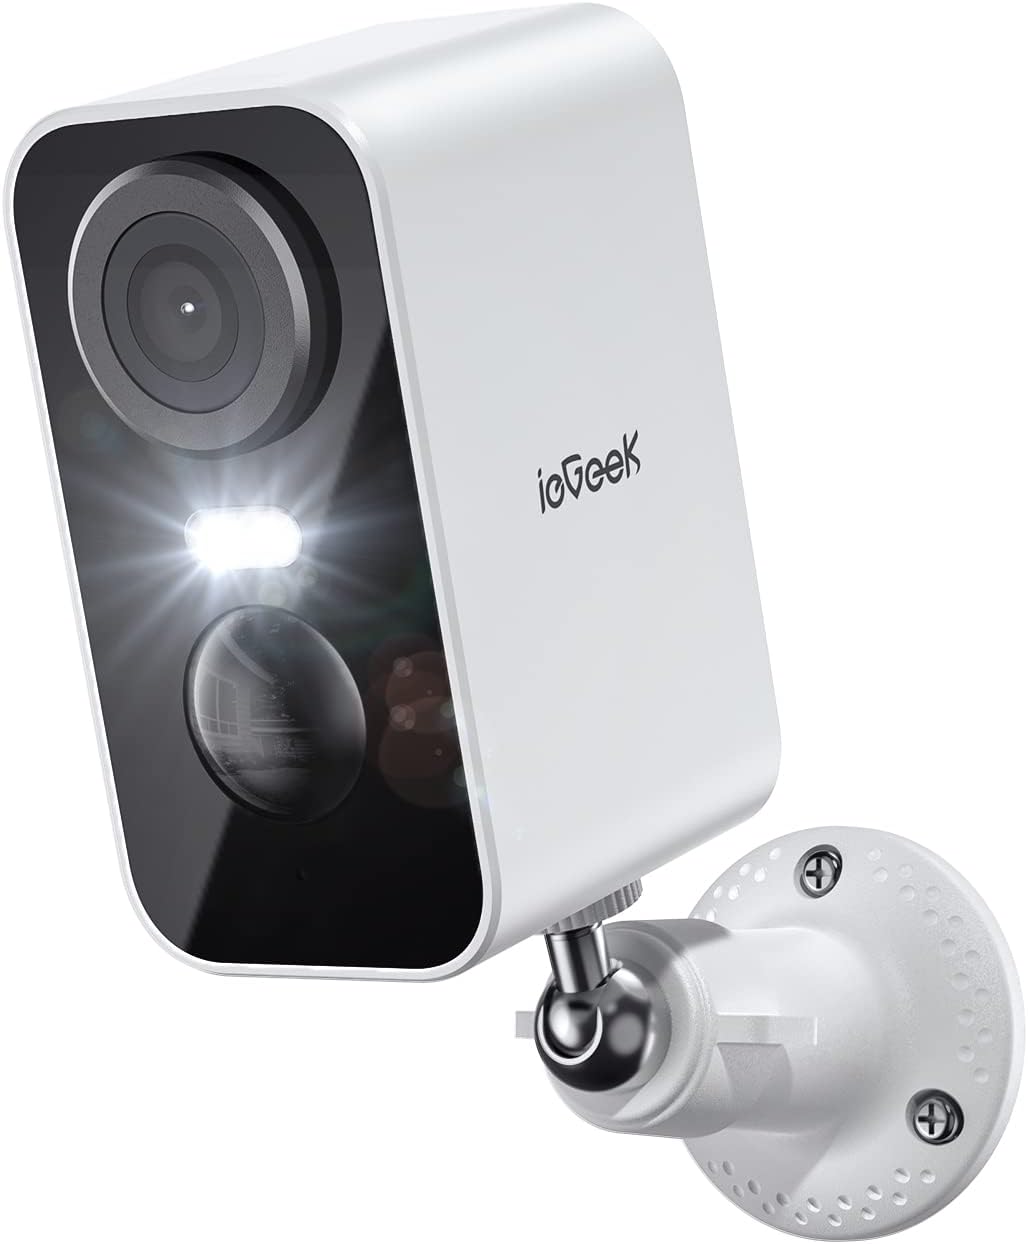 Your Exclusive Discount Awaits! Save 46% on ieGeek Security Cameras Wireless Outdoor